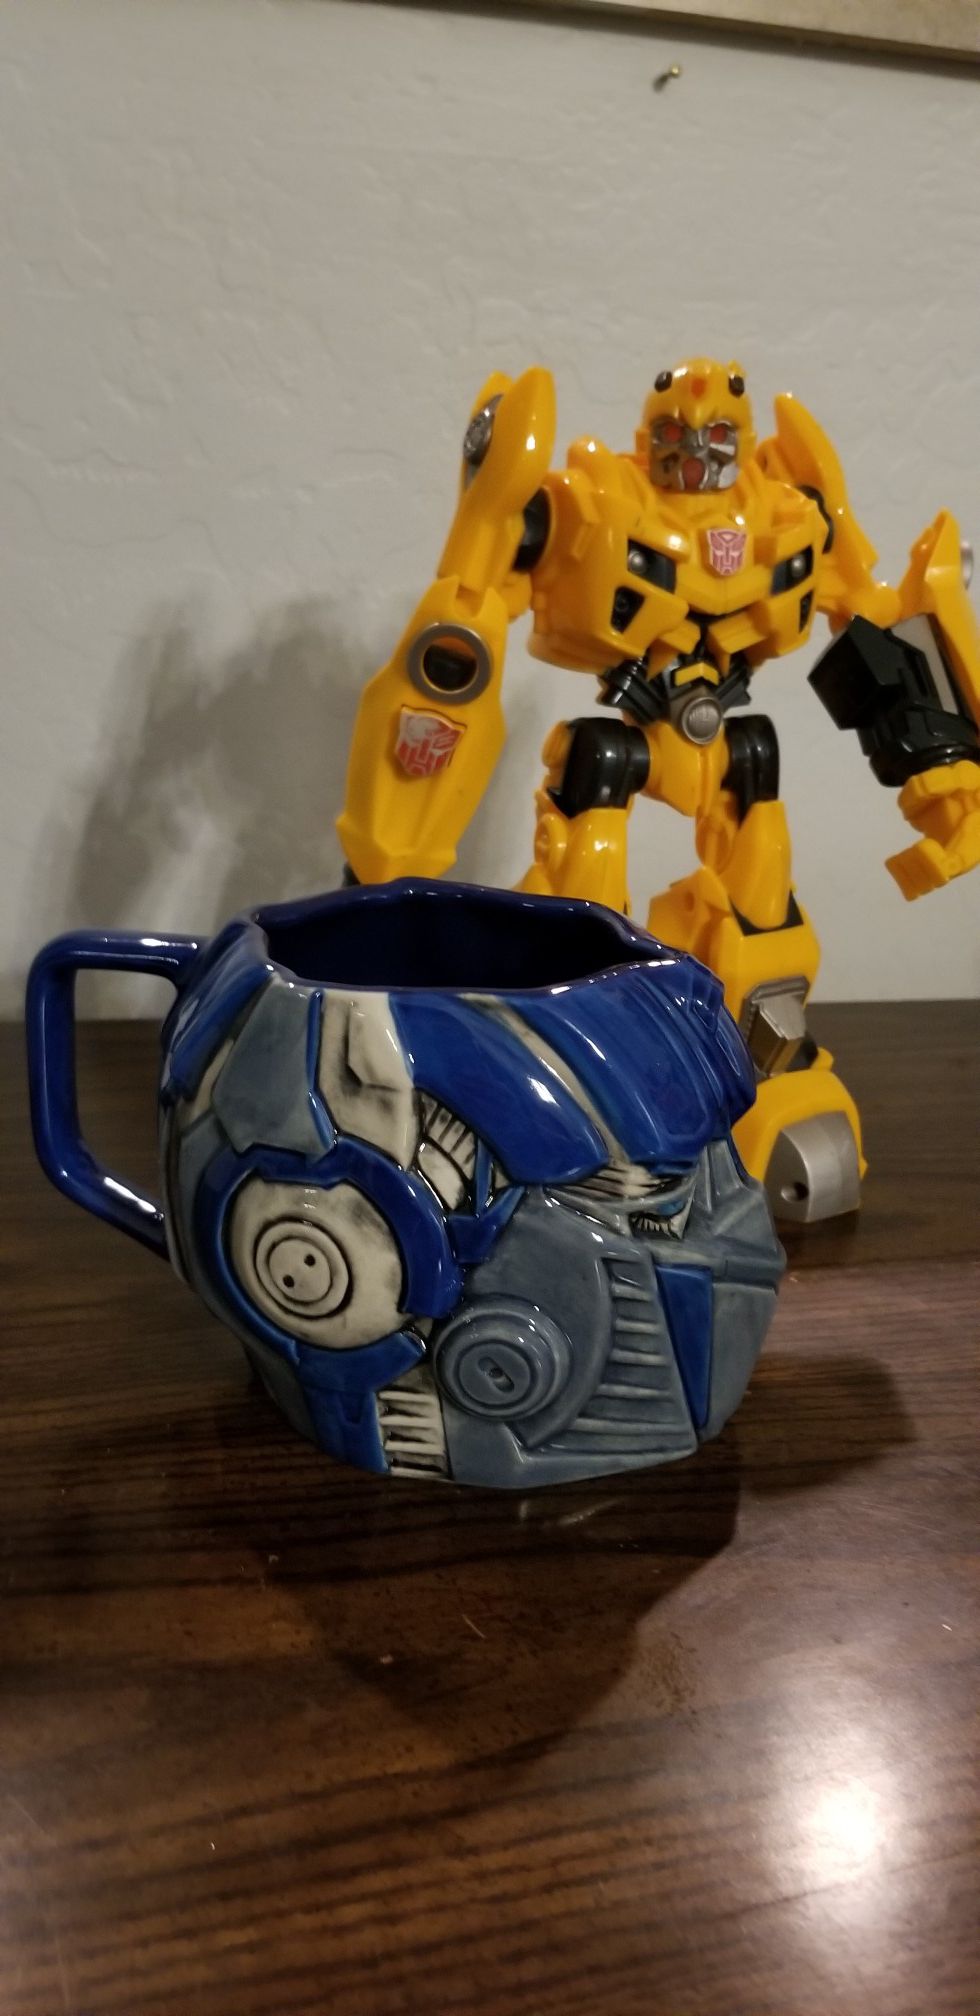 Bumble Bee toy and Optimus Prime ceramic mug- Universal Studios 2012 collectable